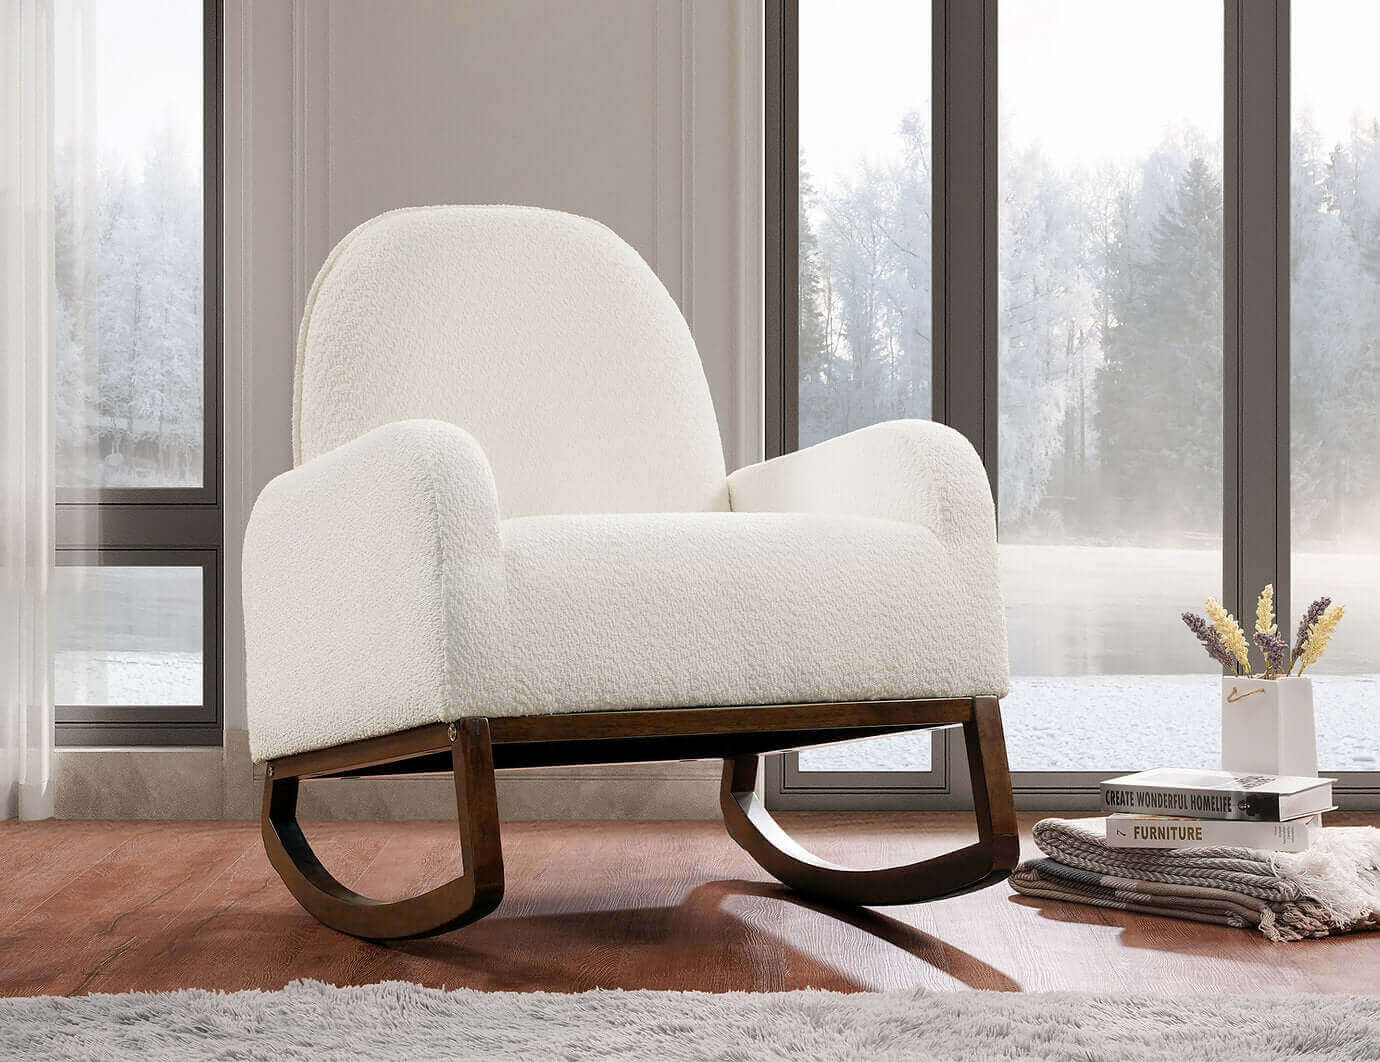 International Furniture Distribution Centre - IF-663 (new not available) - IF-663 Rocking Chair